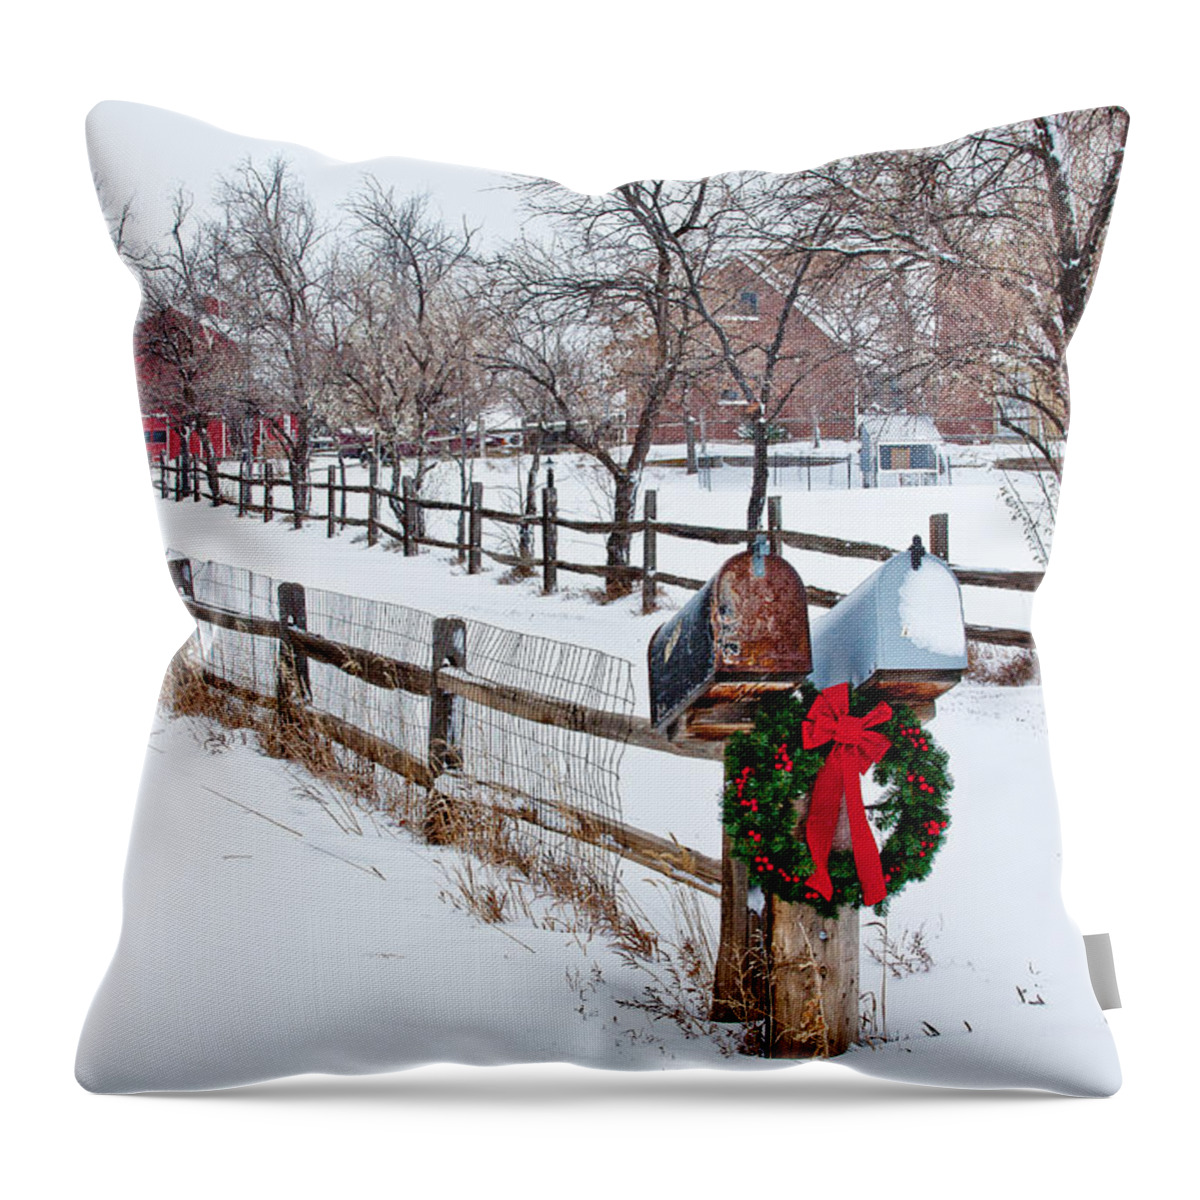 Christmas Throw Pillow featuring the photograph Country Holiday Cheer by Teri Virbickis